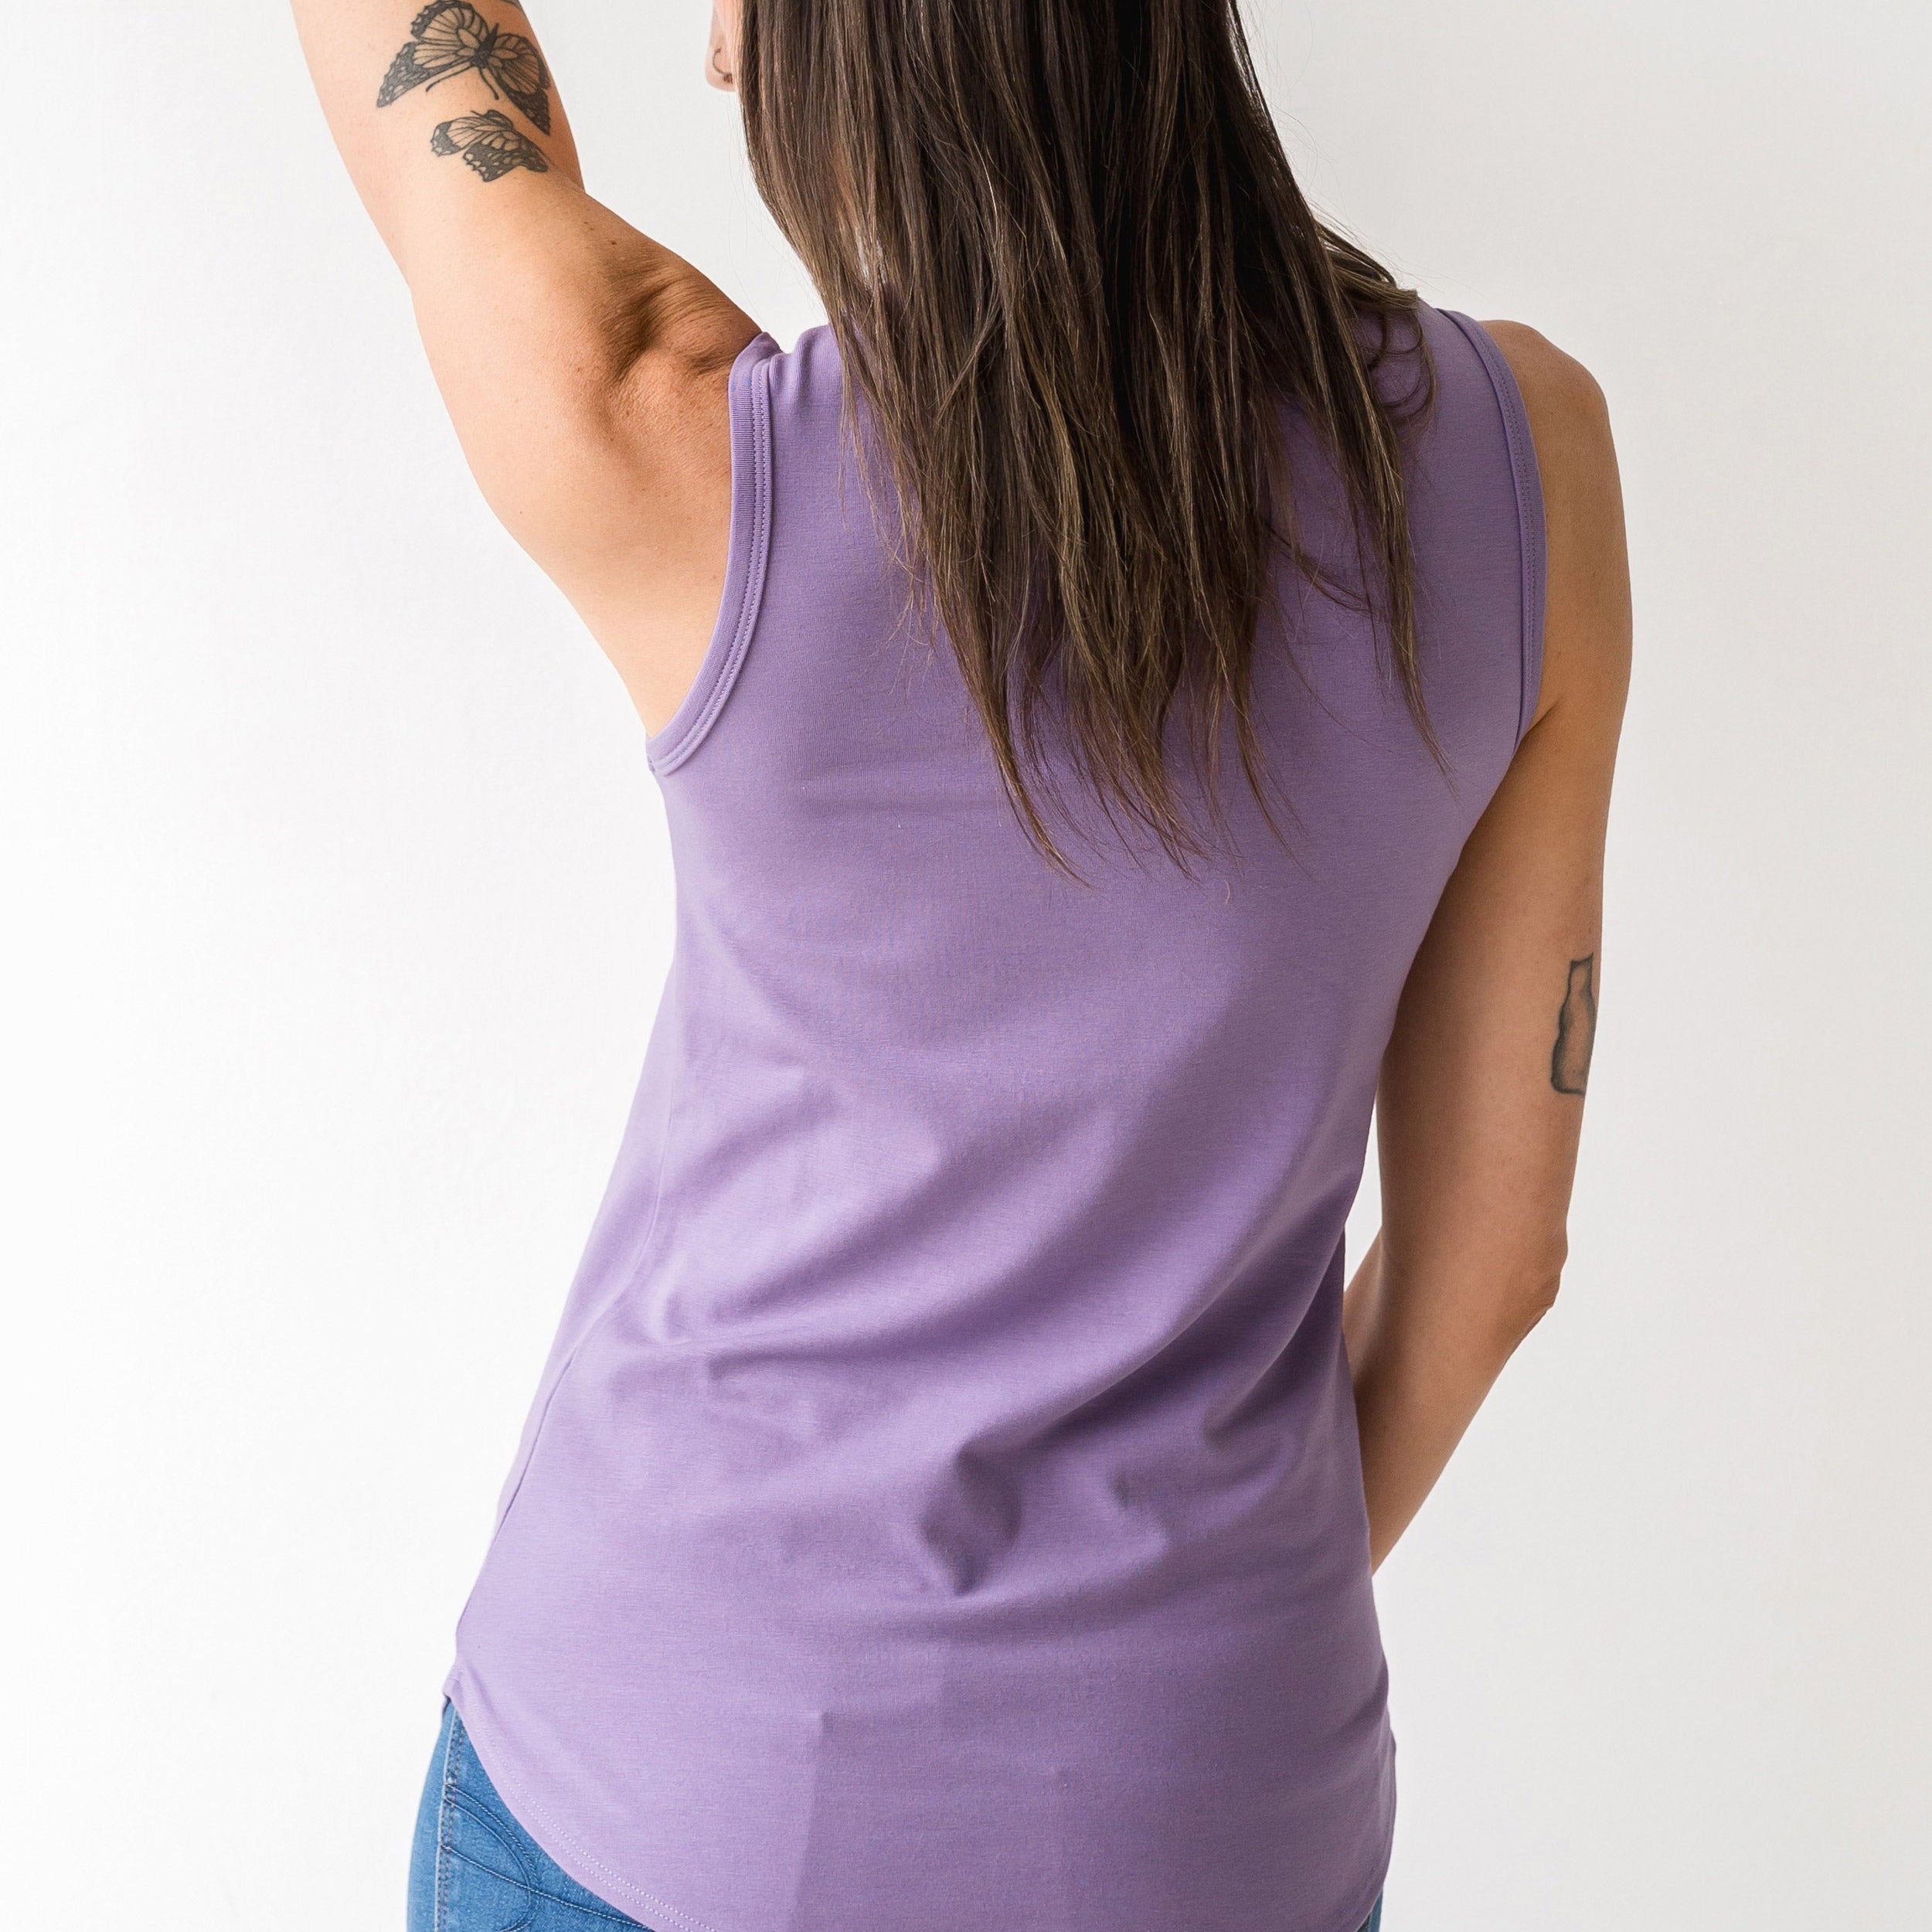 The Highneck Tank Top in Lavender | FRANC Sustainable Clothing